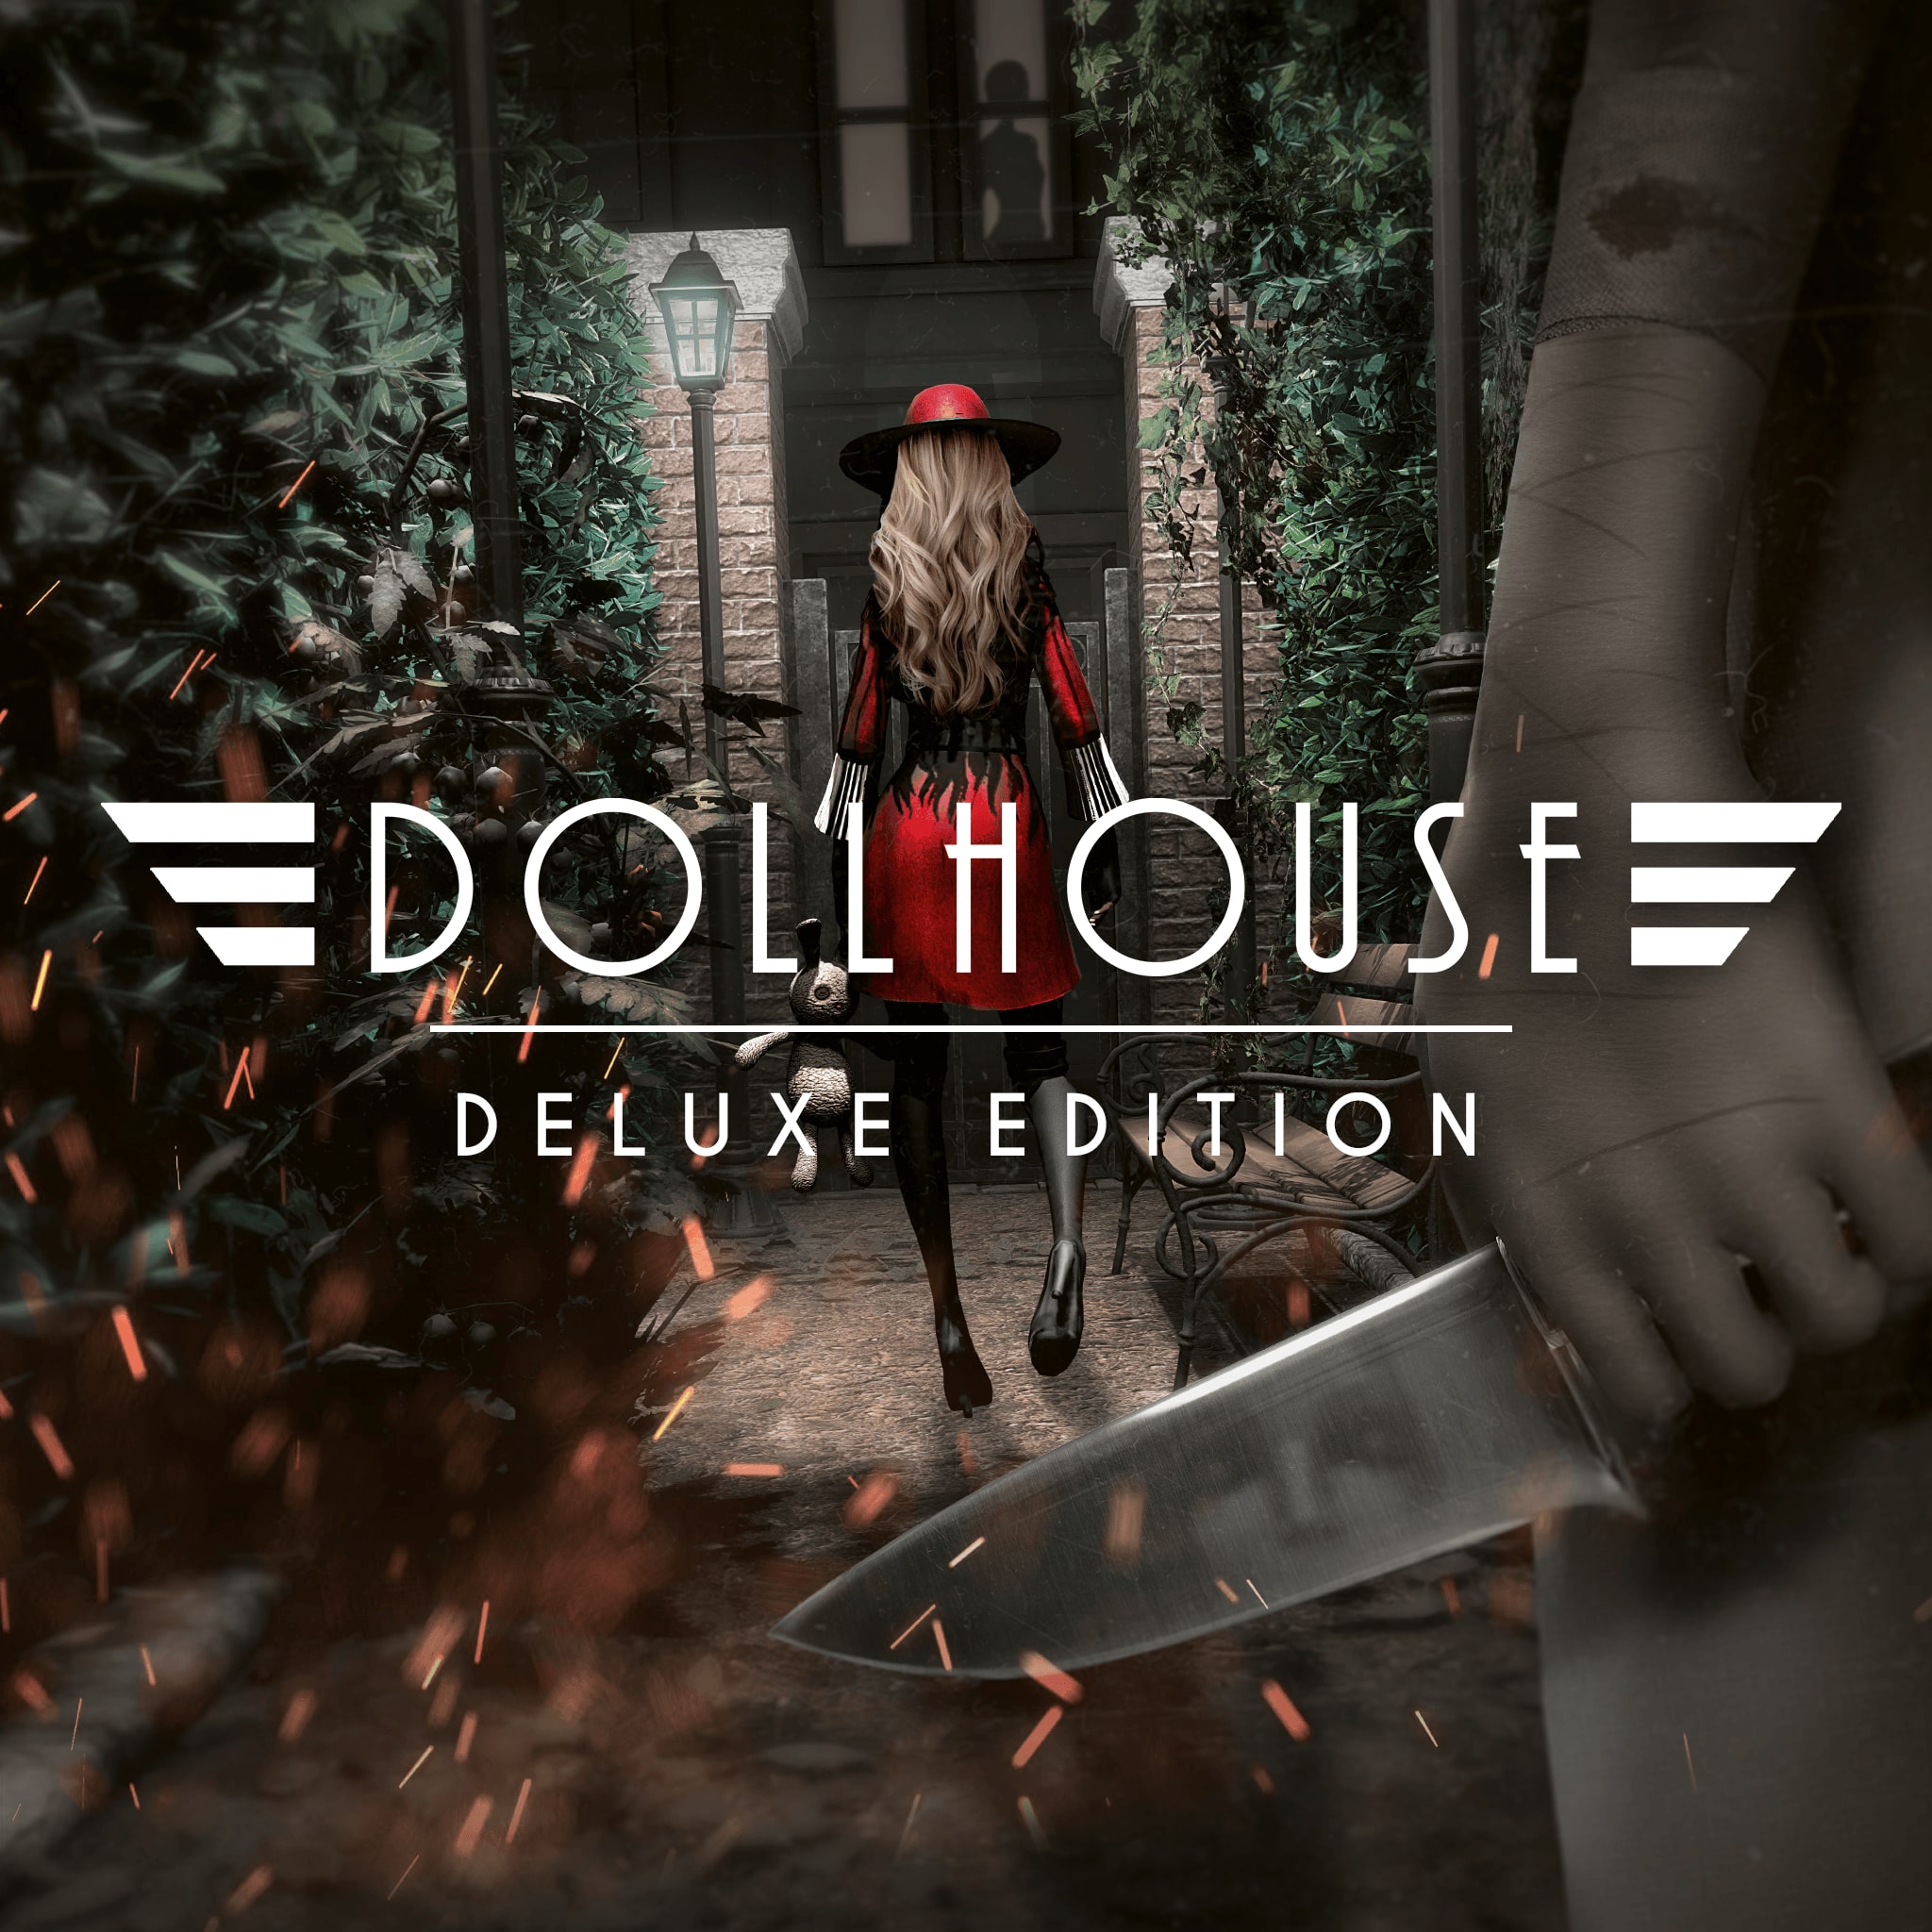 Dollhouse - Deluxe Edition